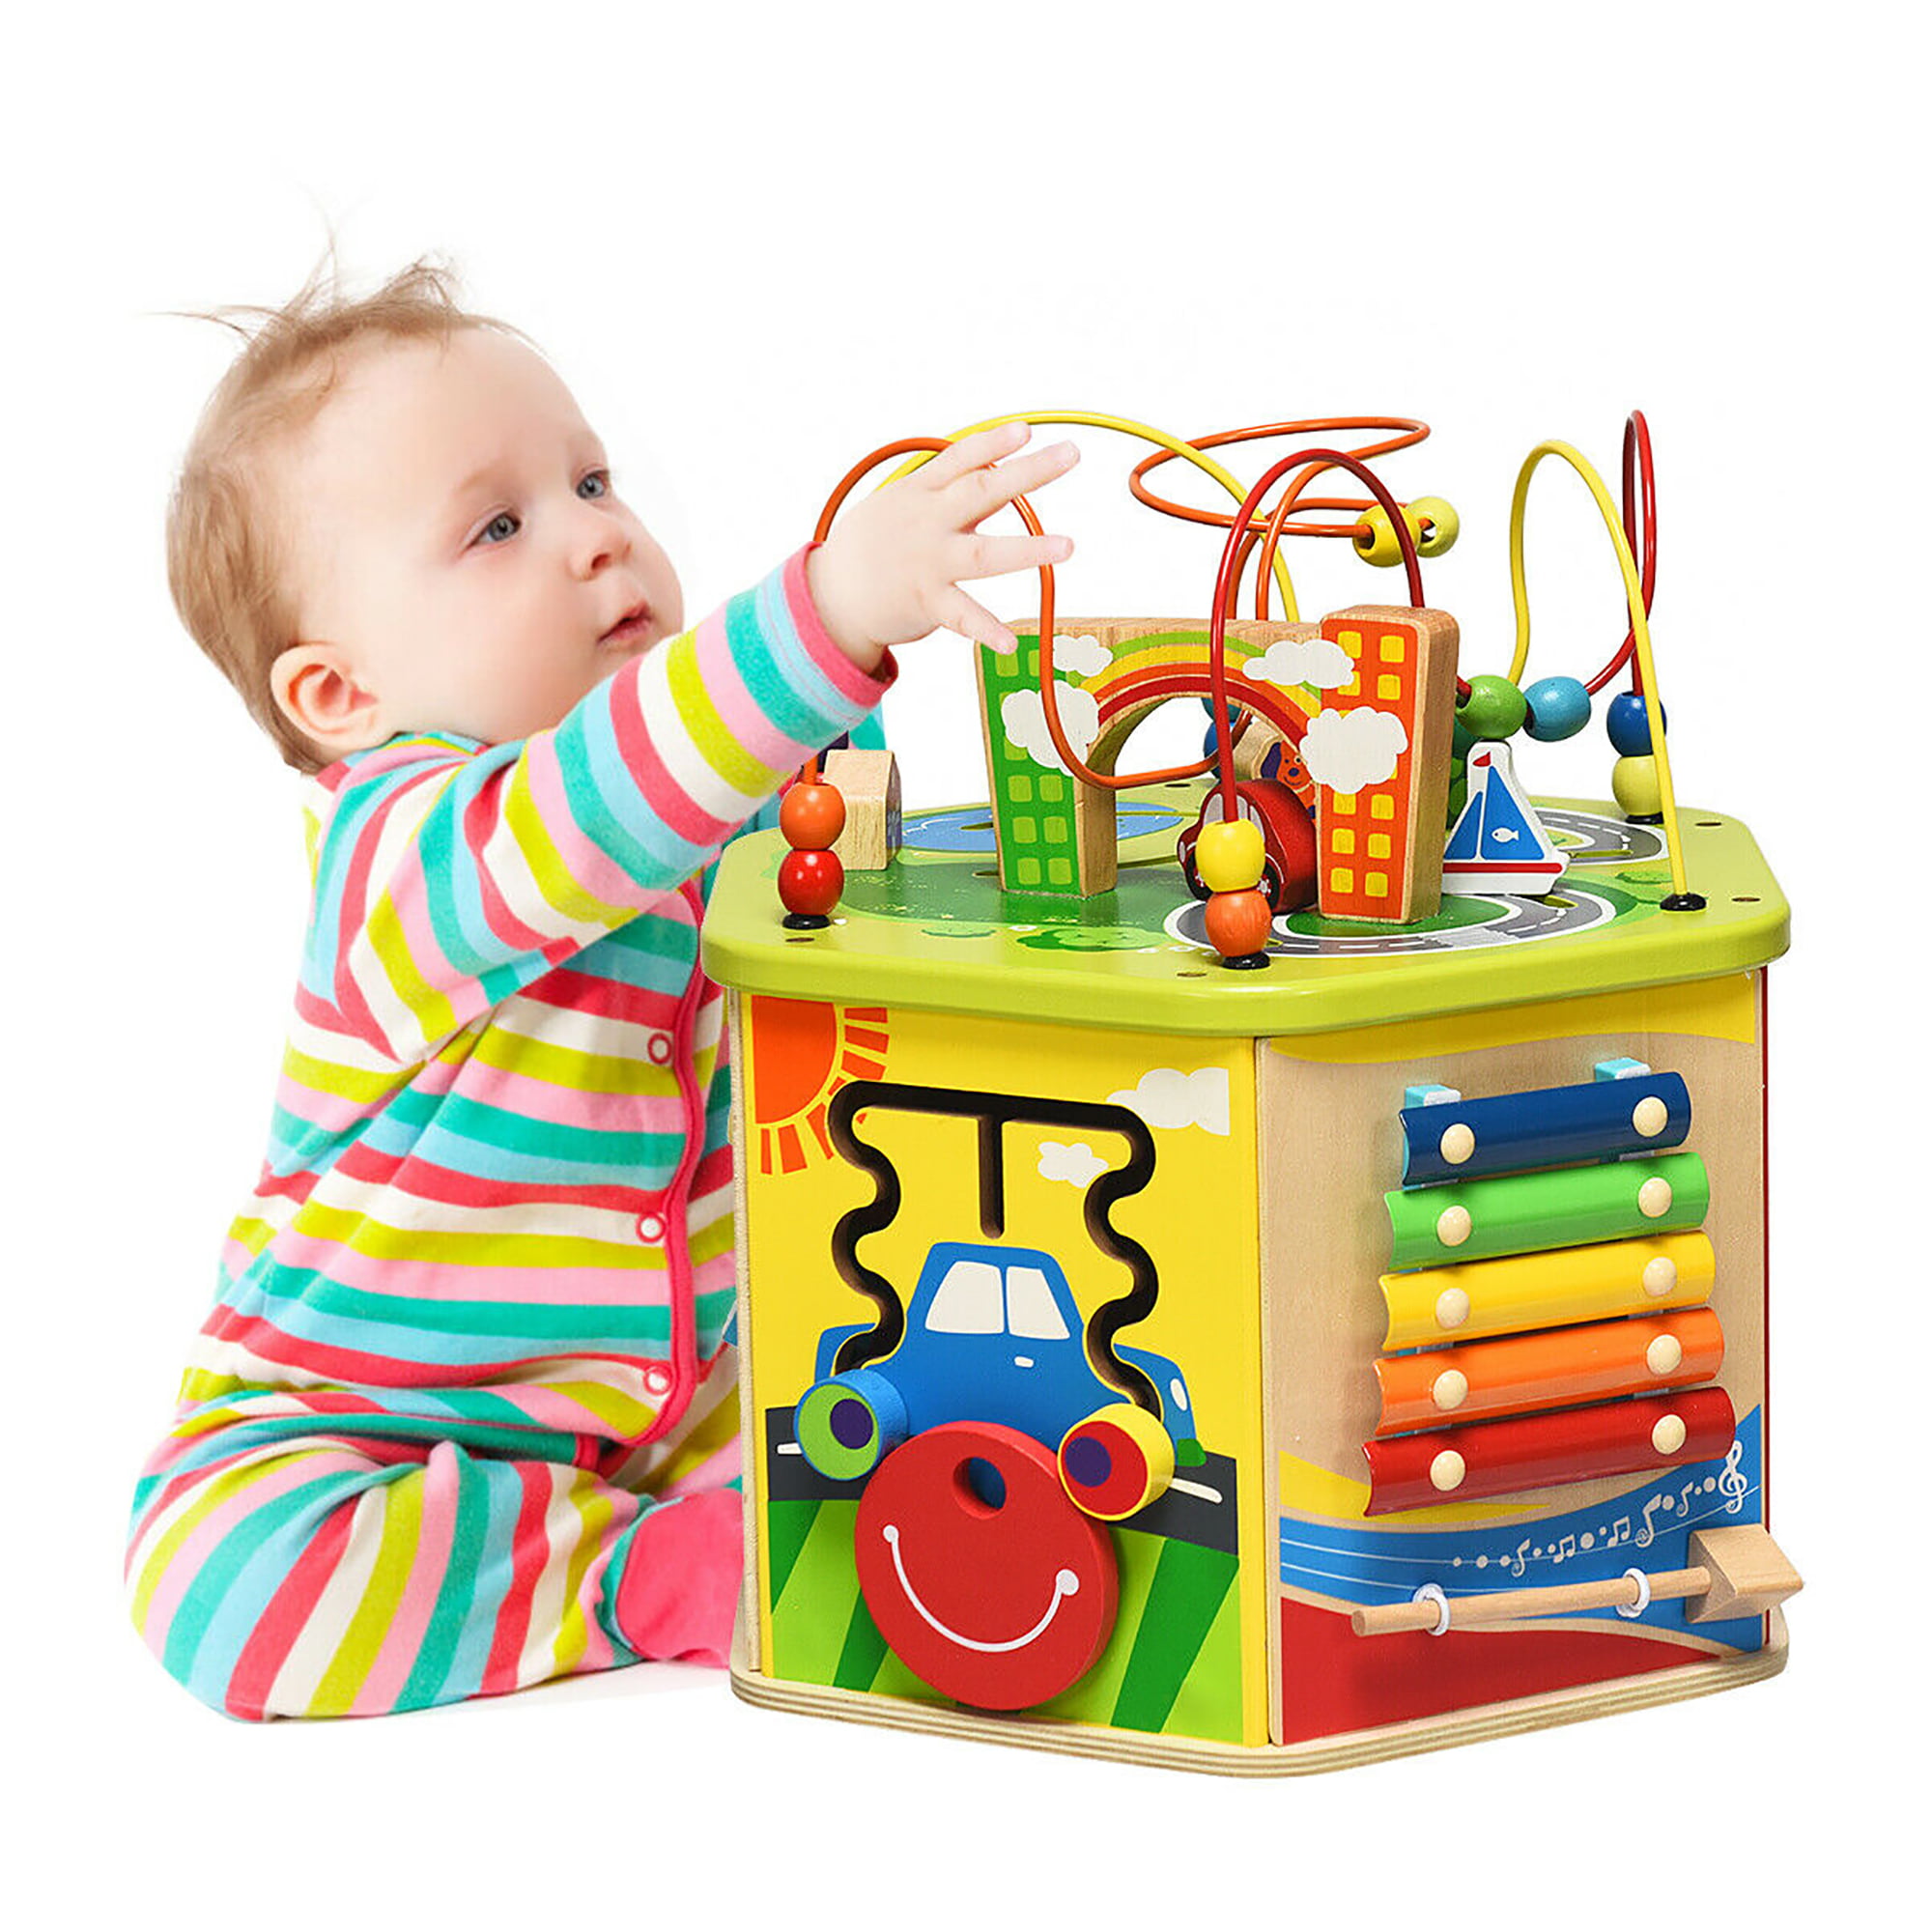 7 in1 Baby Toddler Musical Activity Cube Play Centre Early Educational Games Toy 